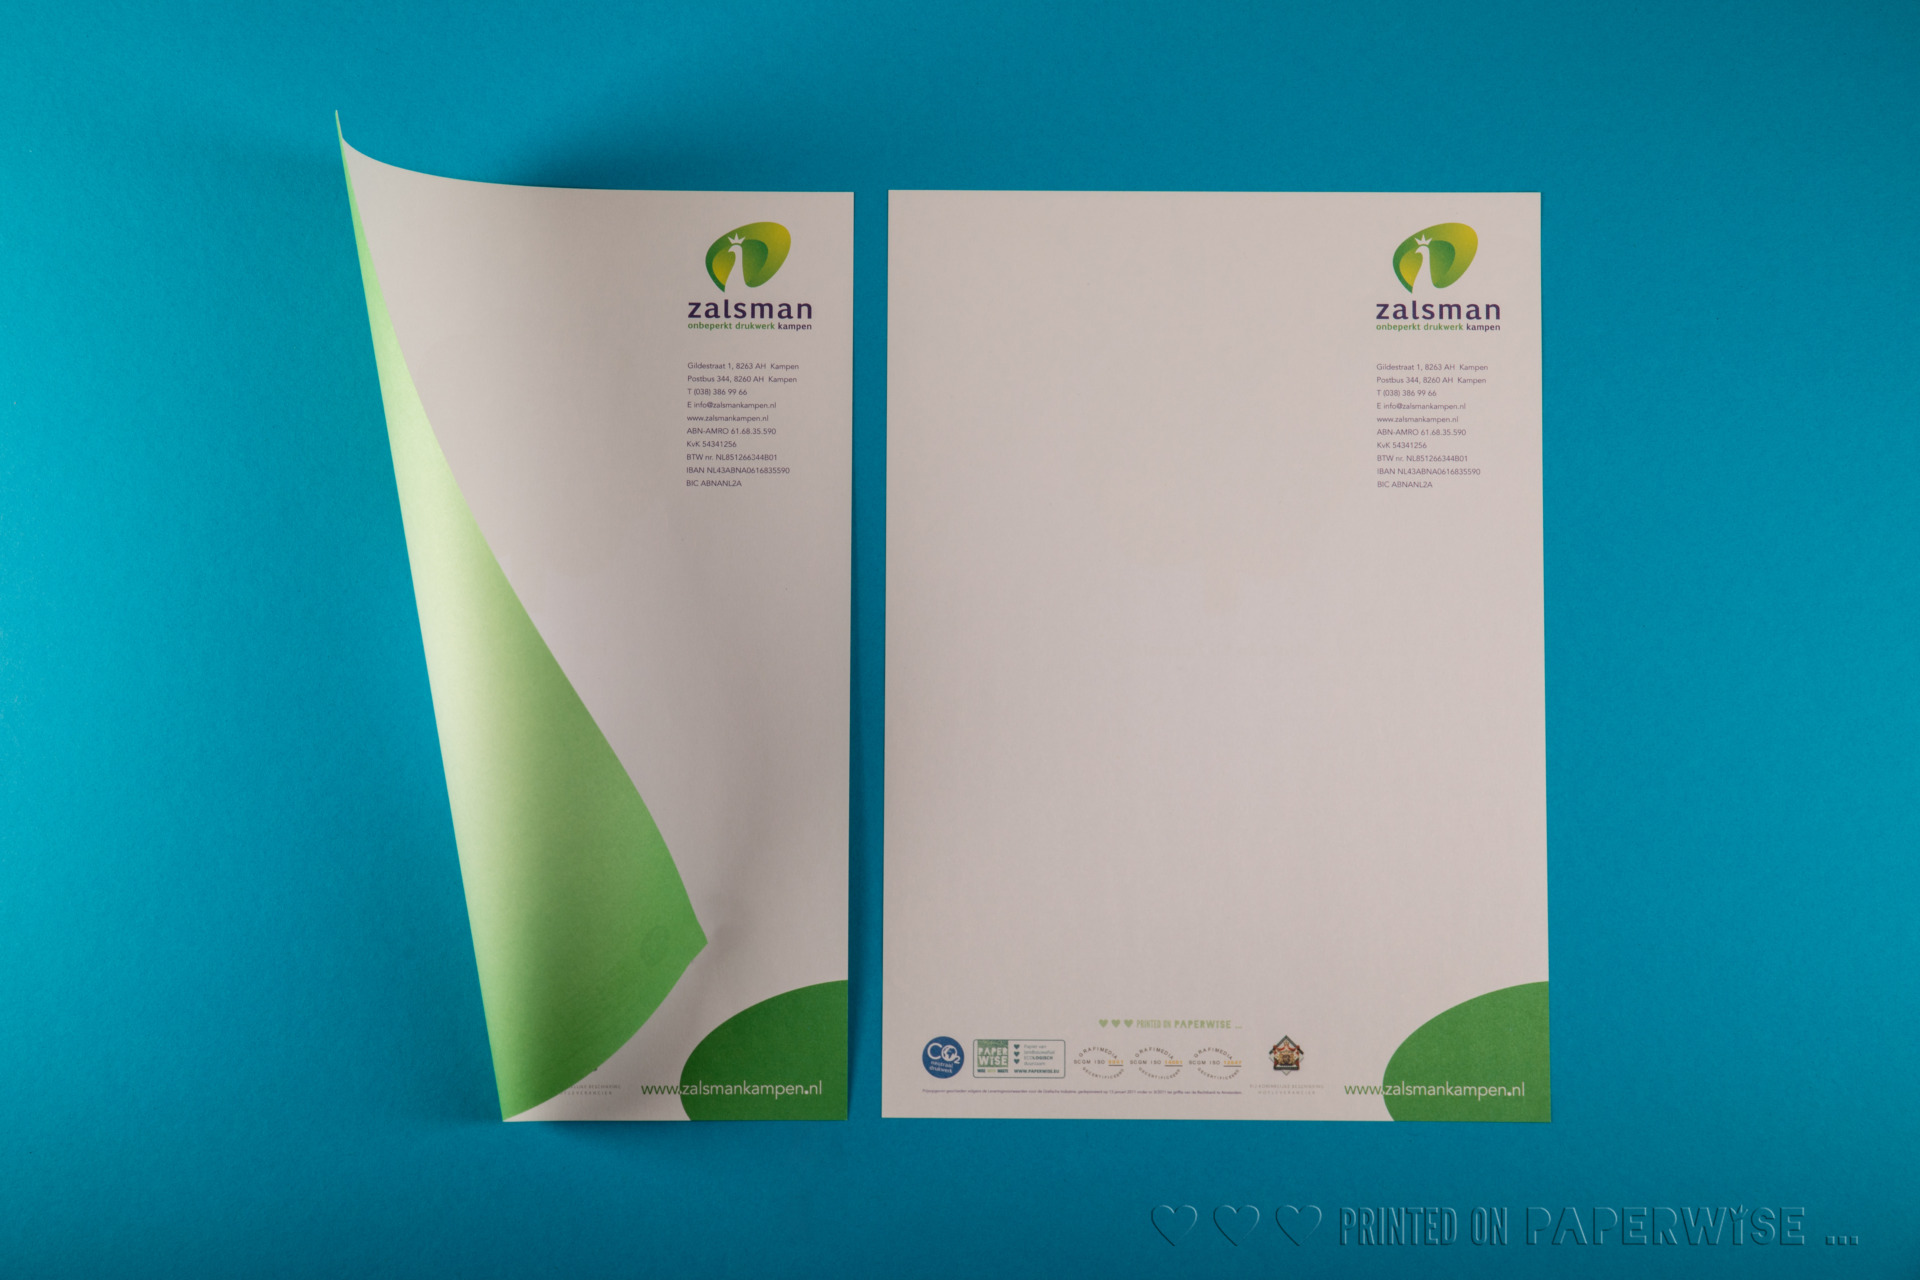 wp content uploads  0    0  sustainable paper board eco writing paper office zalsman 9